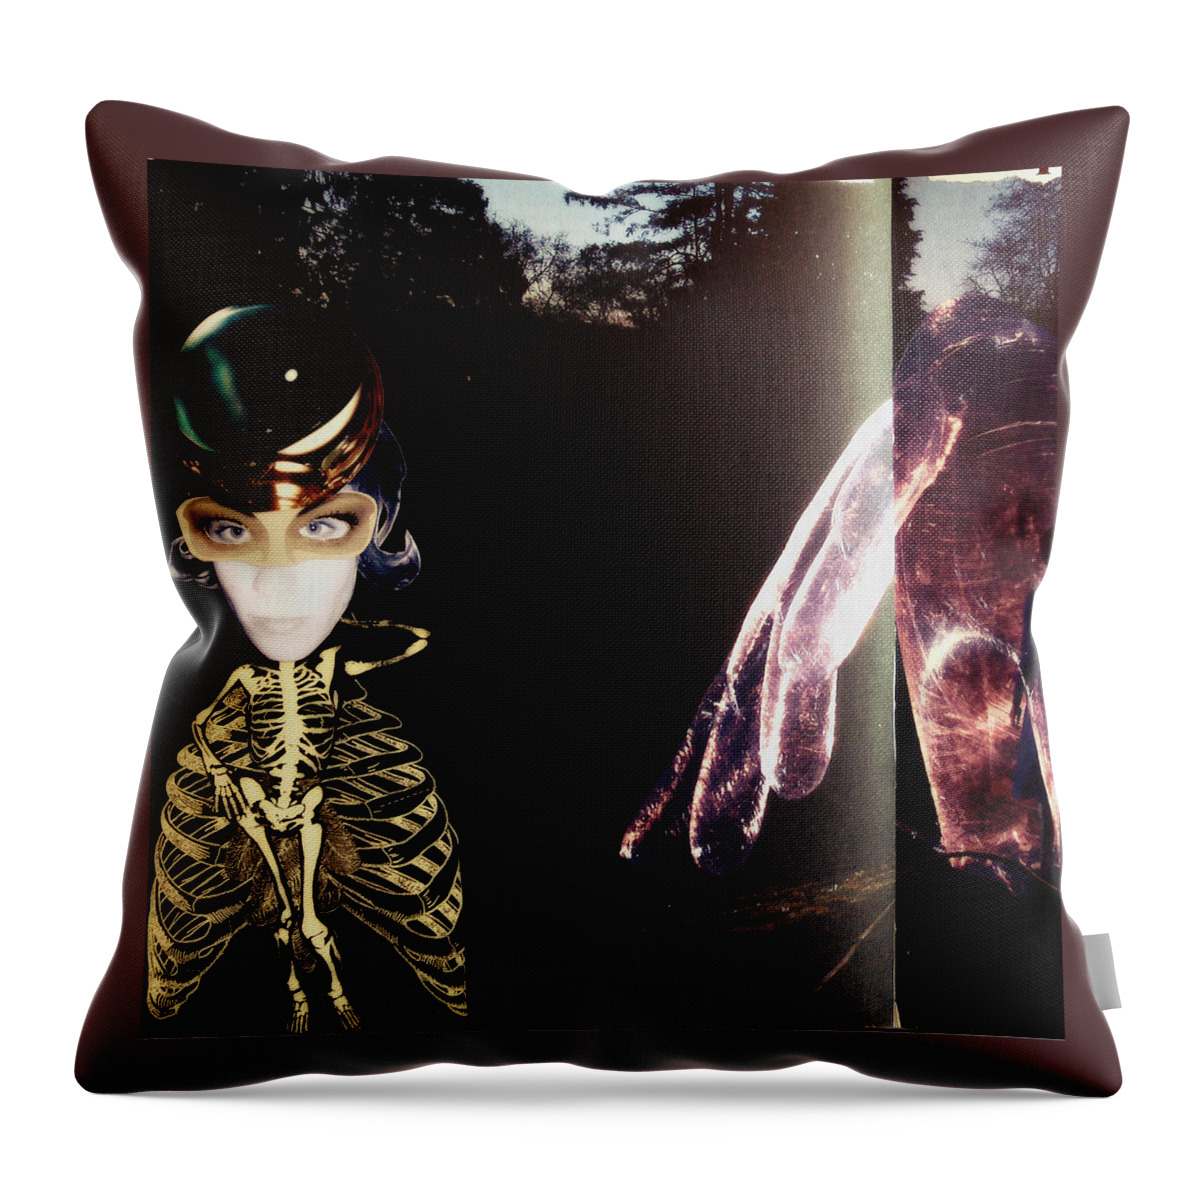 Collage Throw Pillow featuring the digital art Mein Herz by Tanja Leuenberger